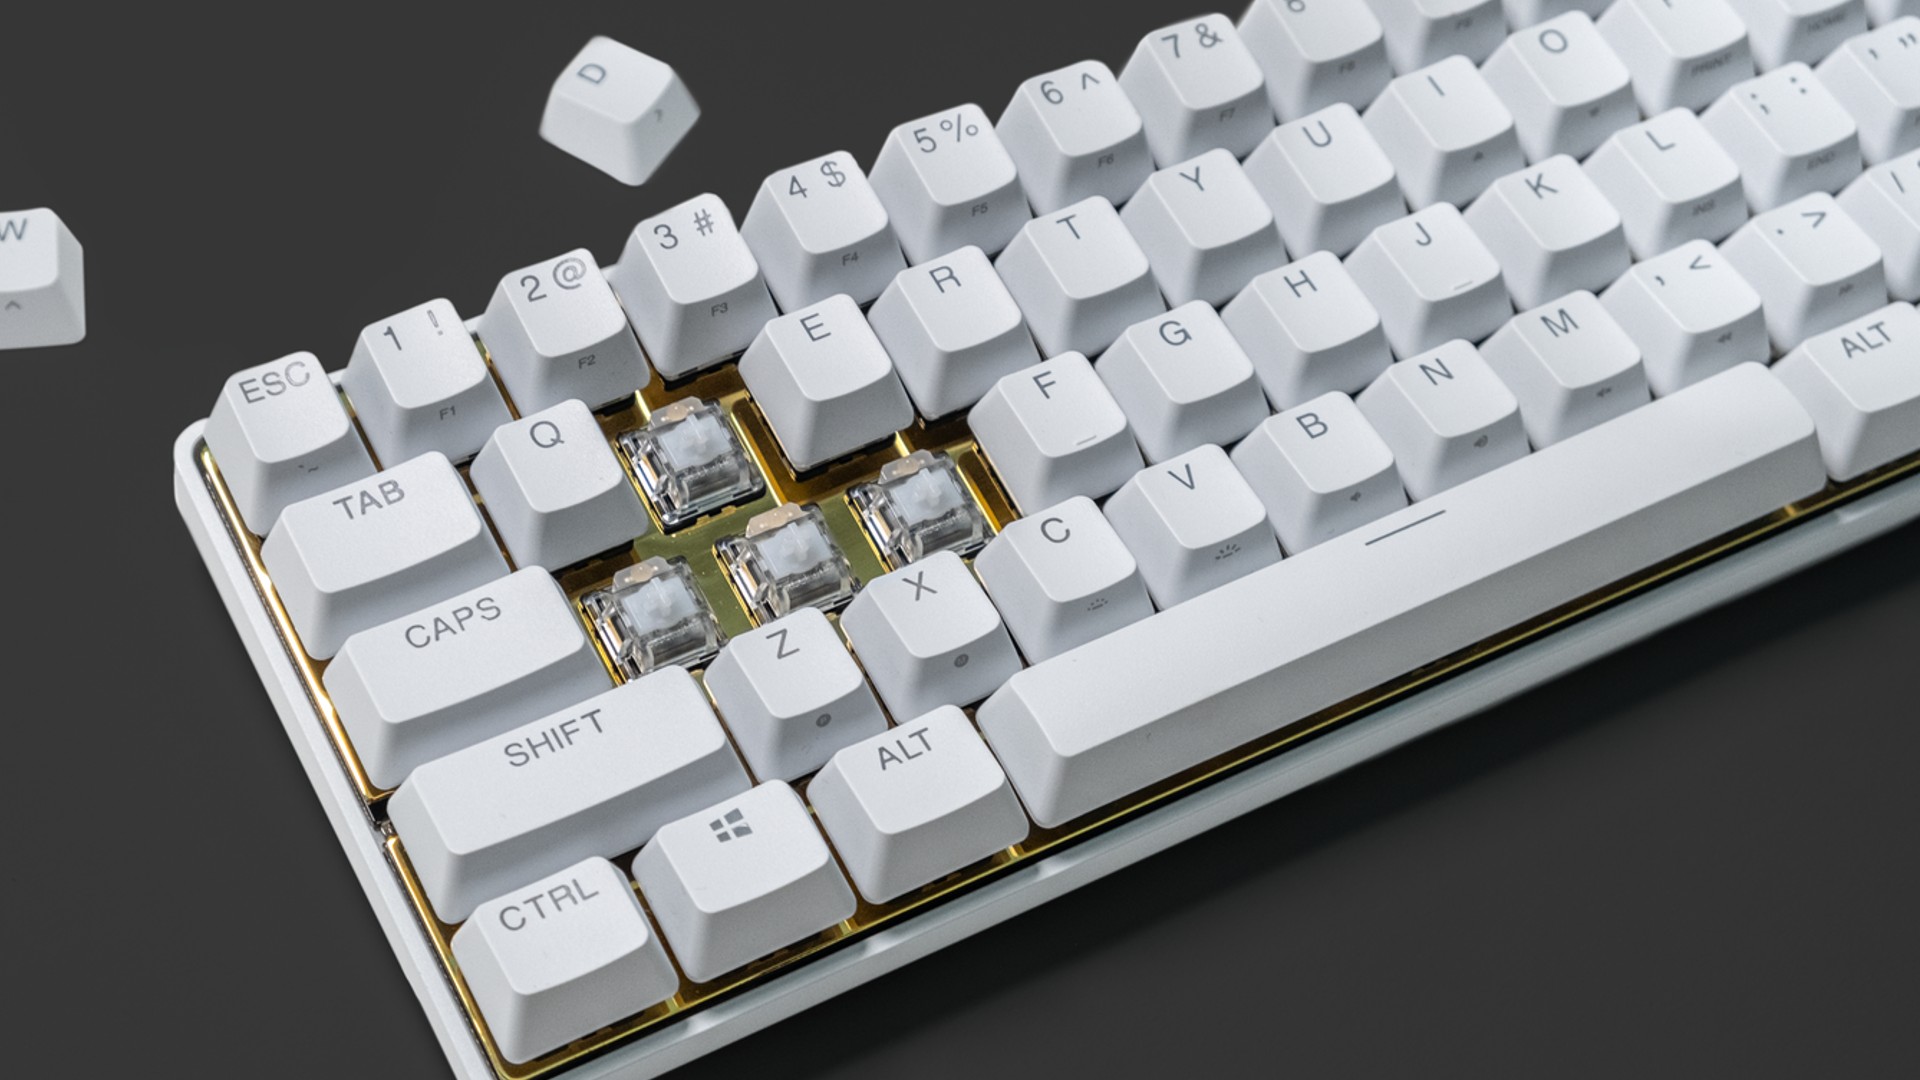 This White x Gold keyboard is beautiful, but only 250 are being made